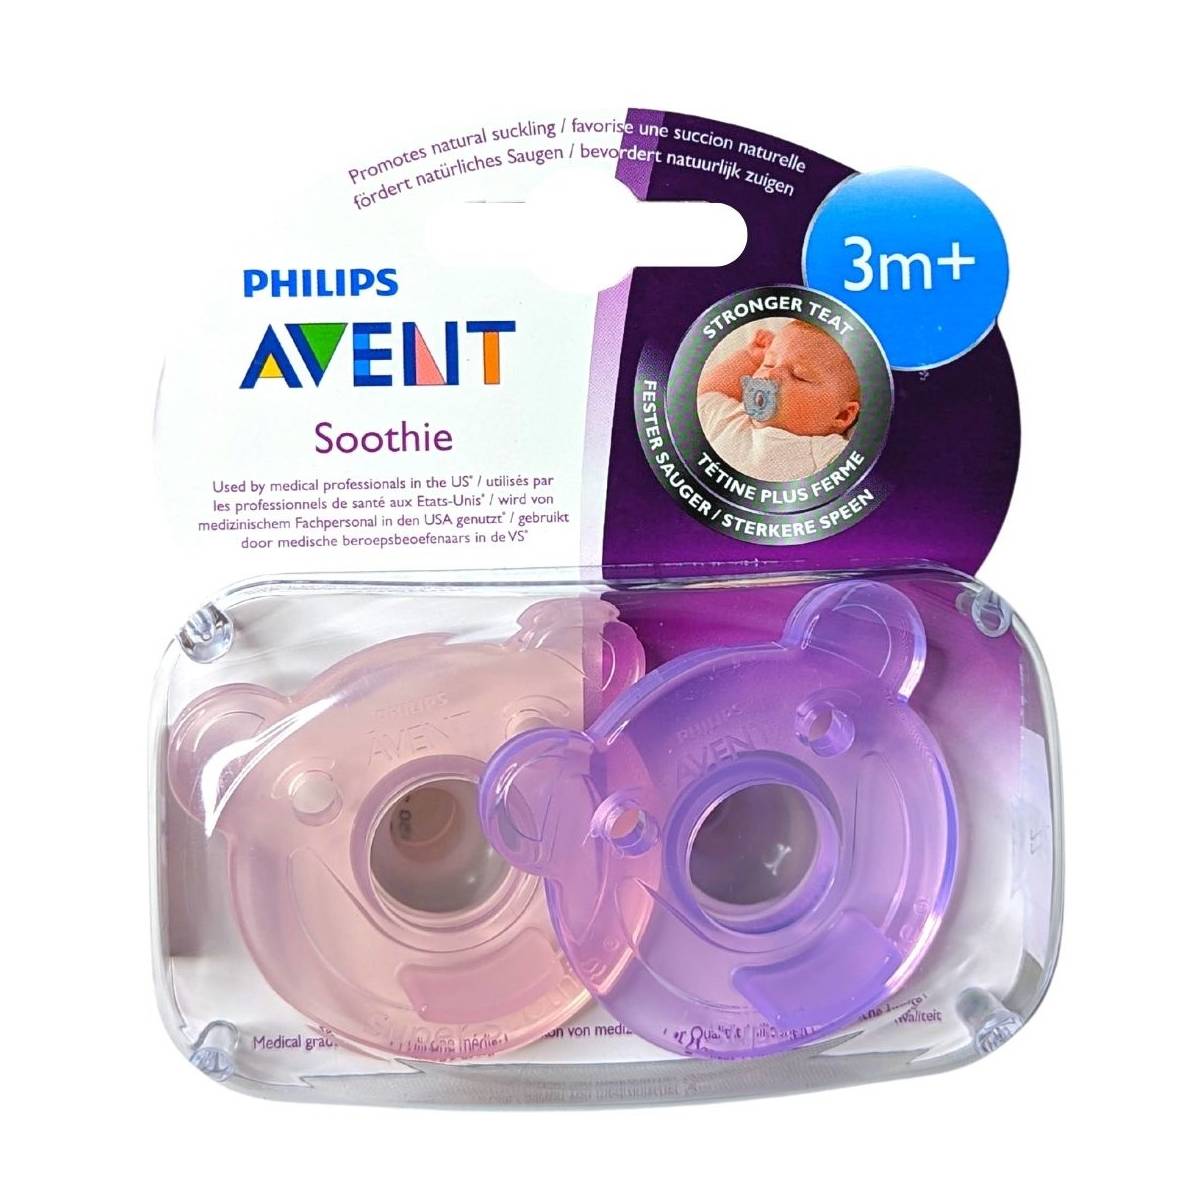 Philips Avent Chupete Soothie 0-6 Meses.